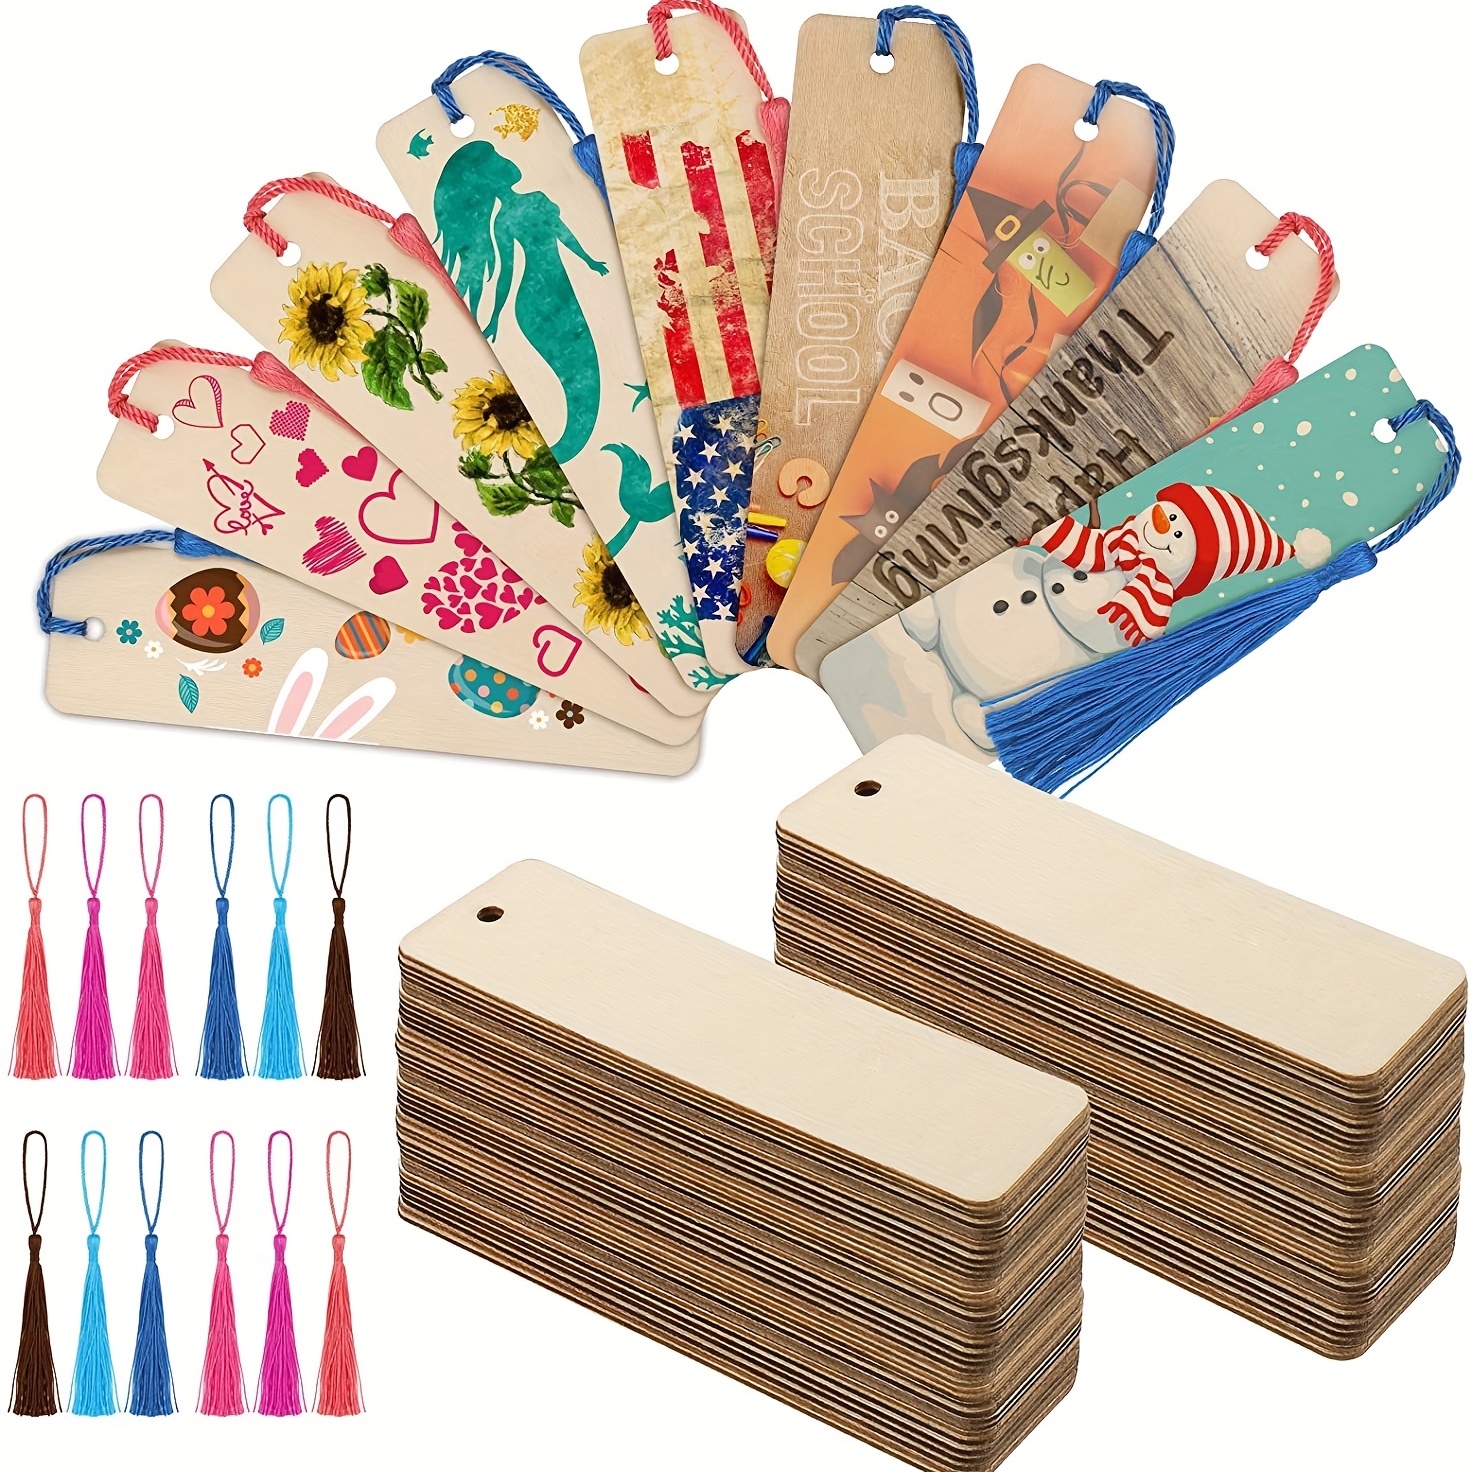 48pcs Kraft Paper Blank Cardstock Bookmarks, Paper Bookmarks with 48pcs Colorful Tassels for DIY Classroom Projects and Gifts Tags